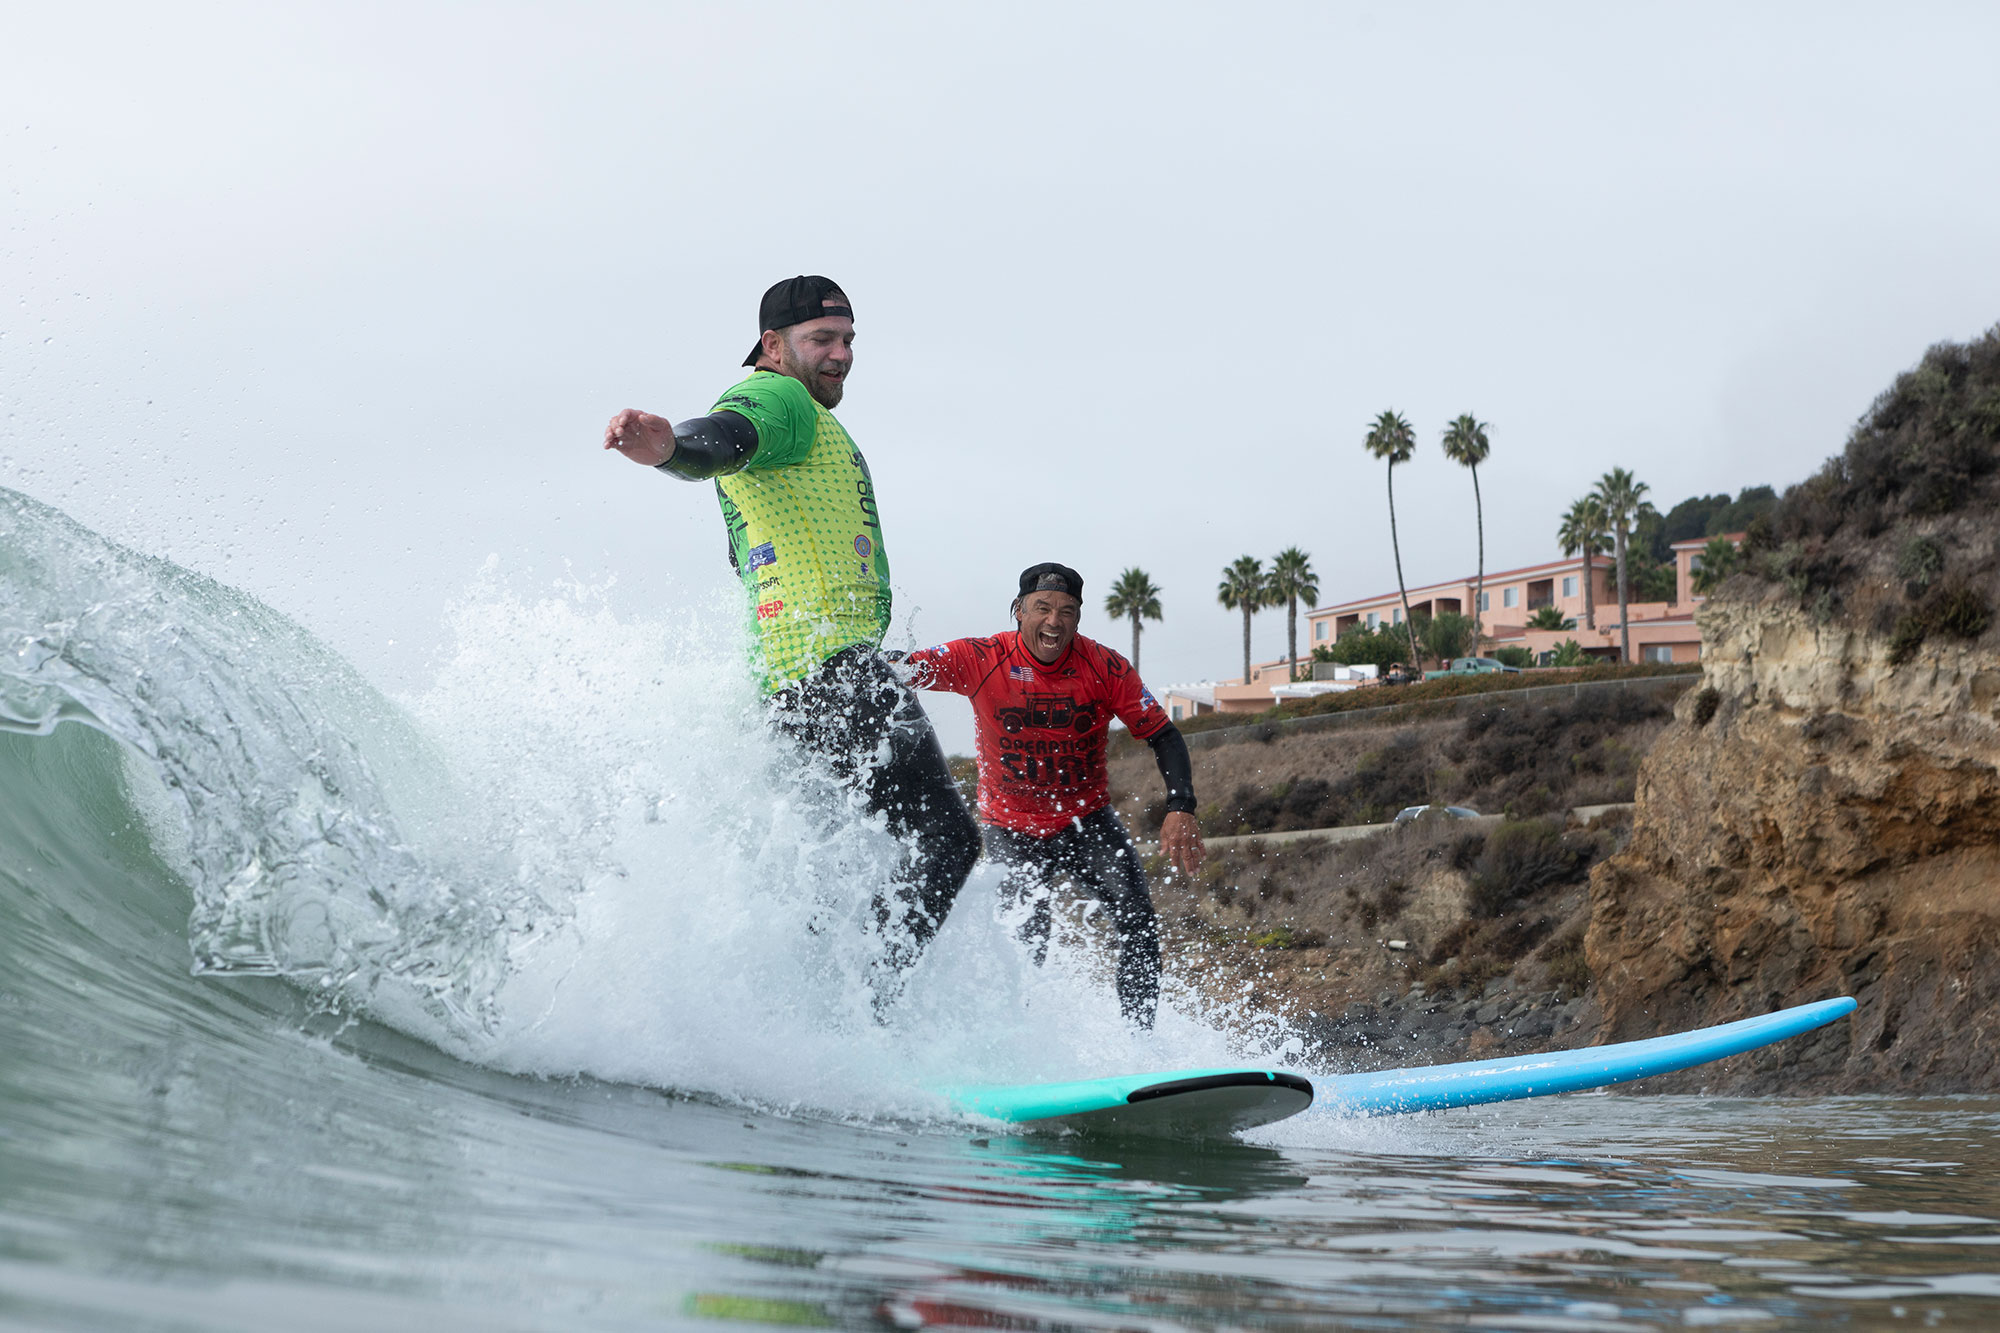 Neil, veteran and Van, founder of operation surf, surfing wave together